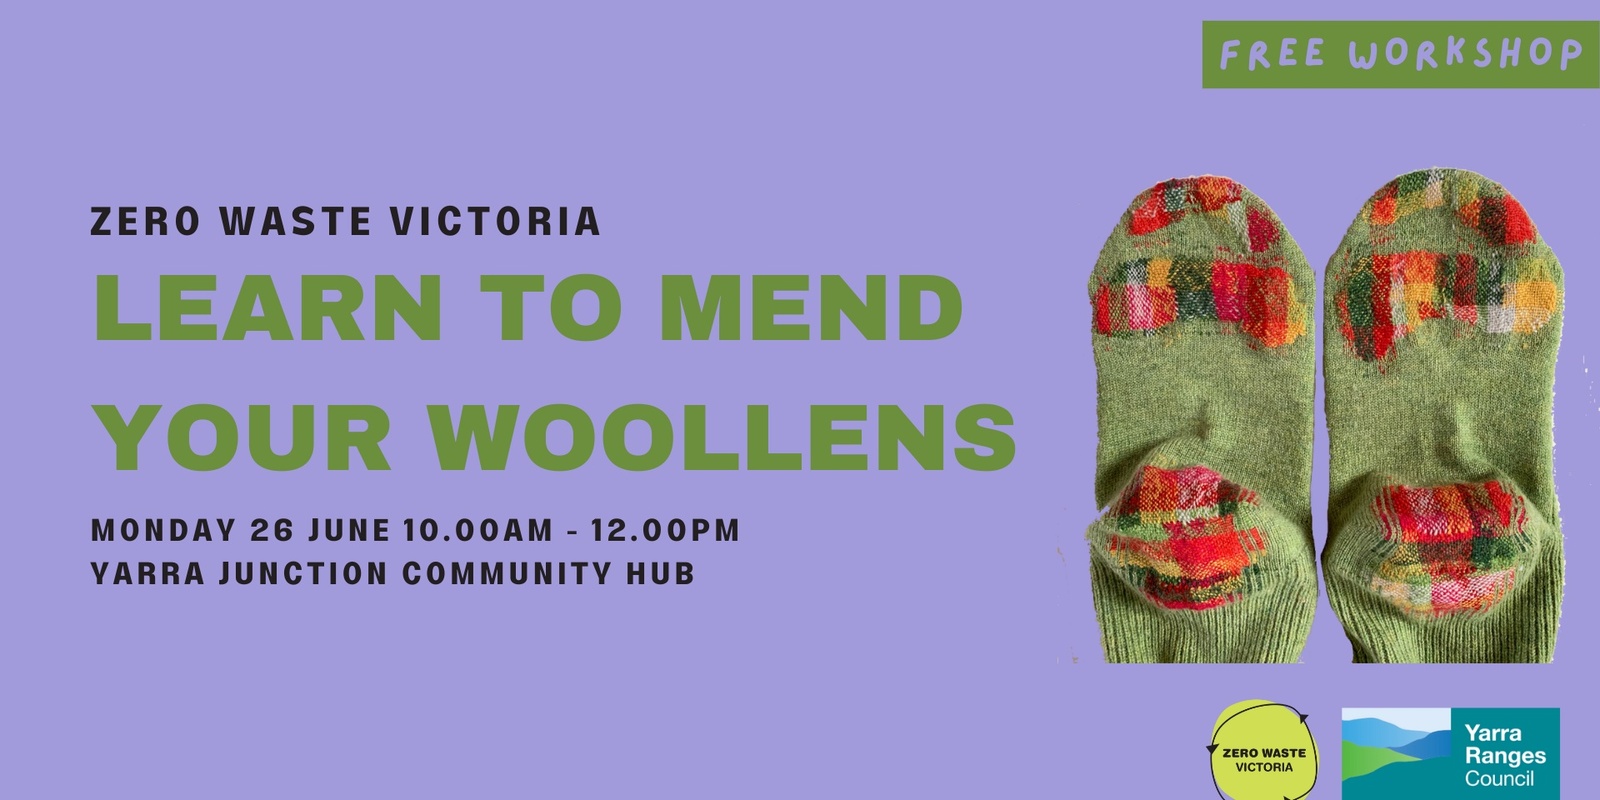 Learn to Mend Your Woollens (Yarra Junction)